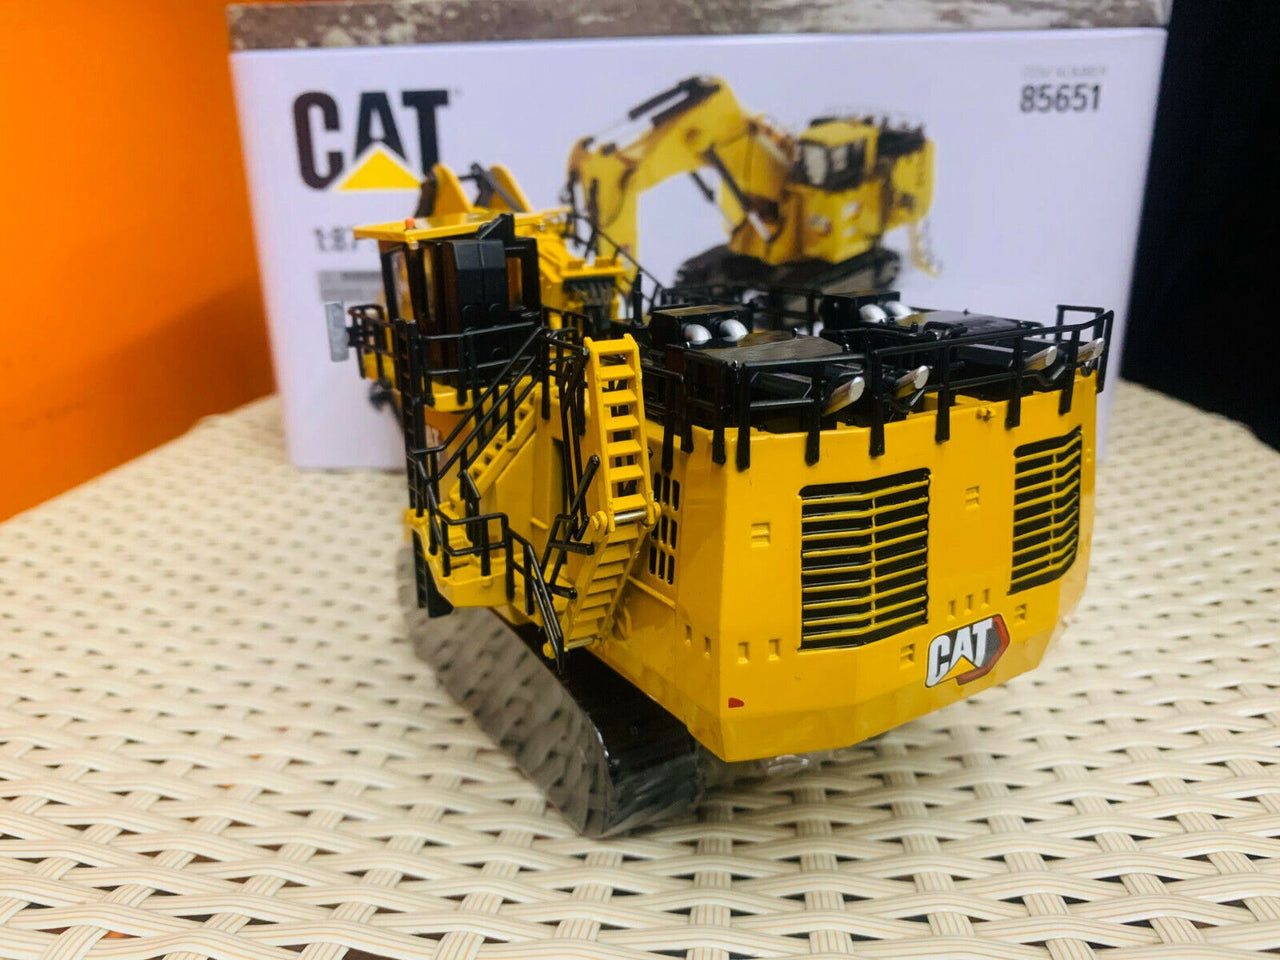 85651 Caterpillar 6060 Hydraulic Front Loader Scale 1:87